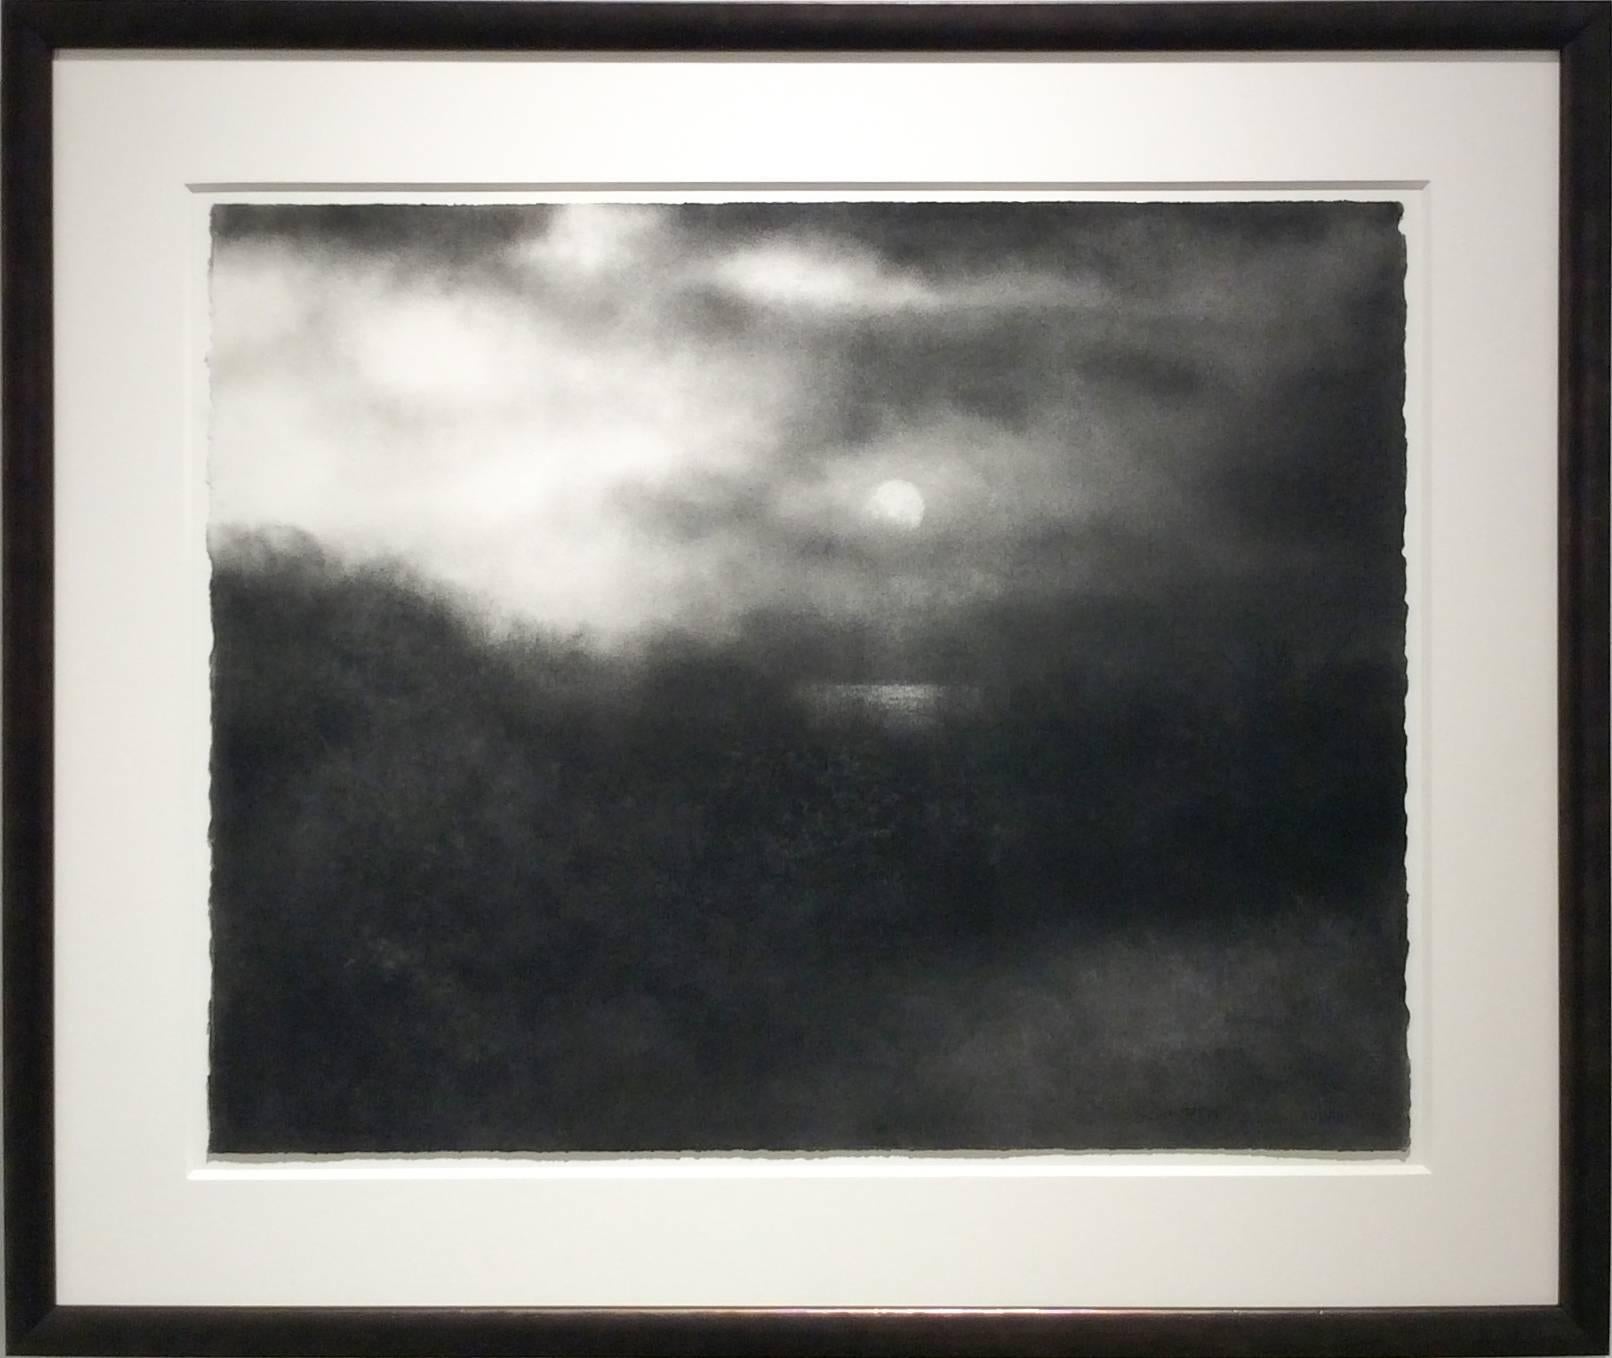 The Long Black Land (Black & White Charcoal Landscape Drawing of Moon & Clouds) 1